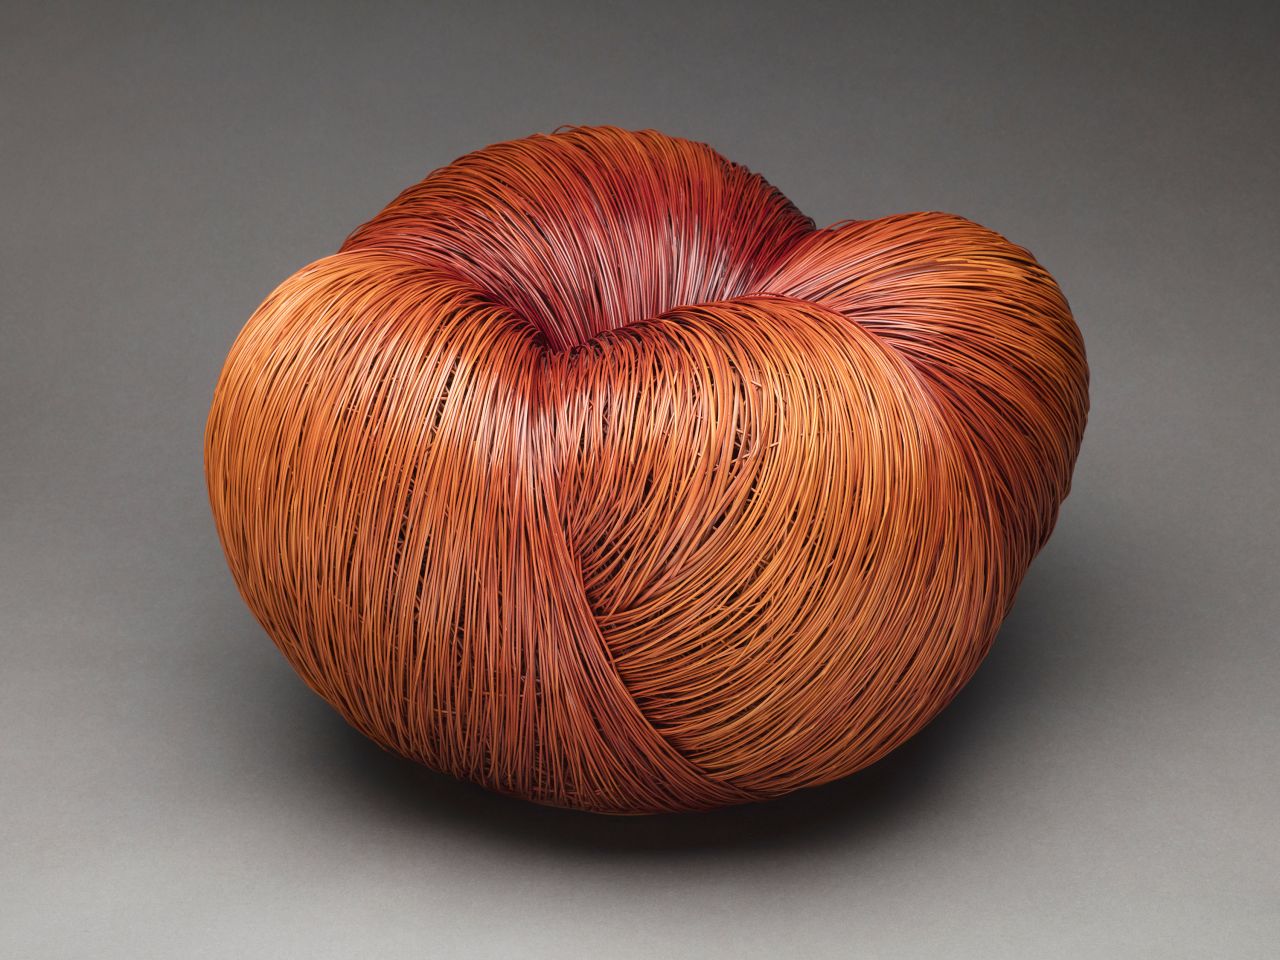 Before becoming a exhibiting artist, Kogyoku used to create practical baskets for wholesalers in postwar Japan.